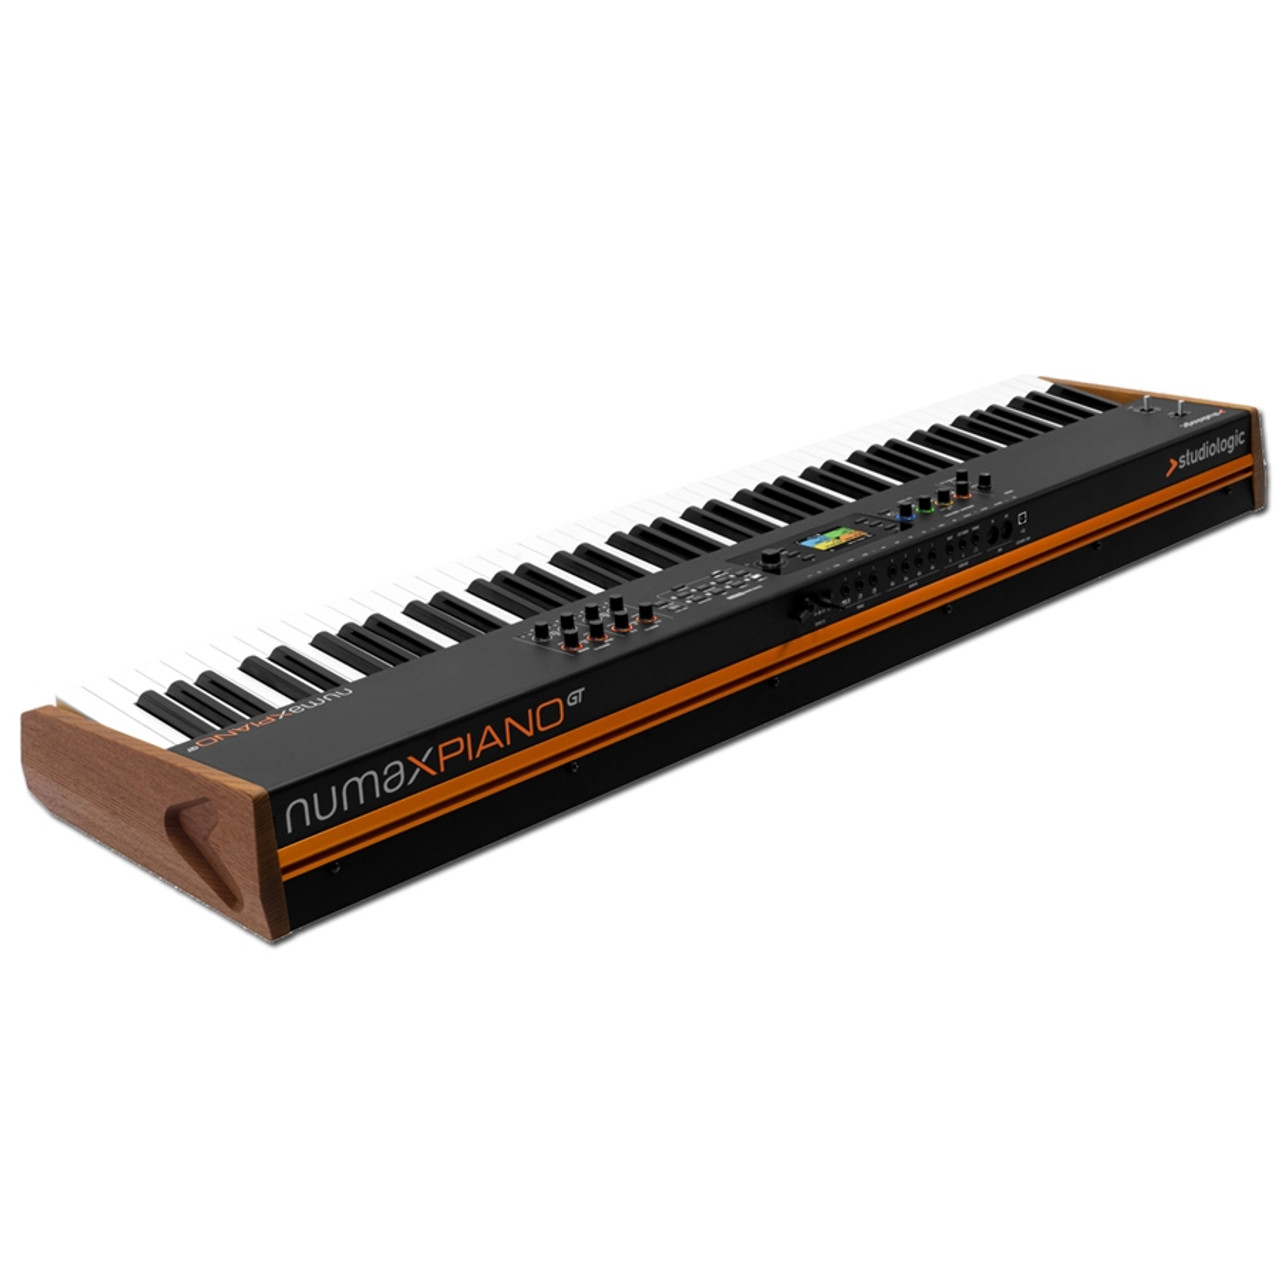 Which Digital Piano Is Closest To Acoustic?